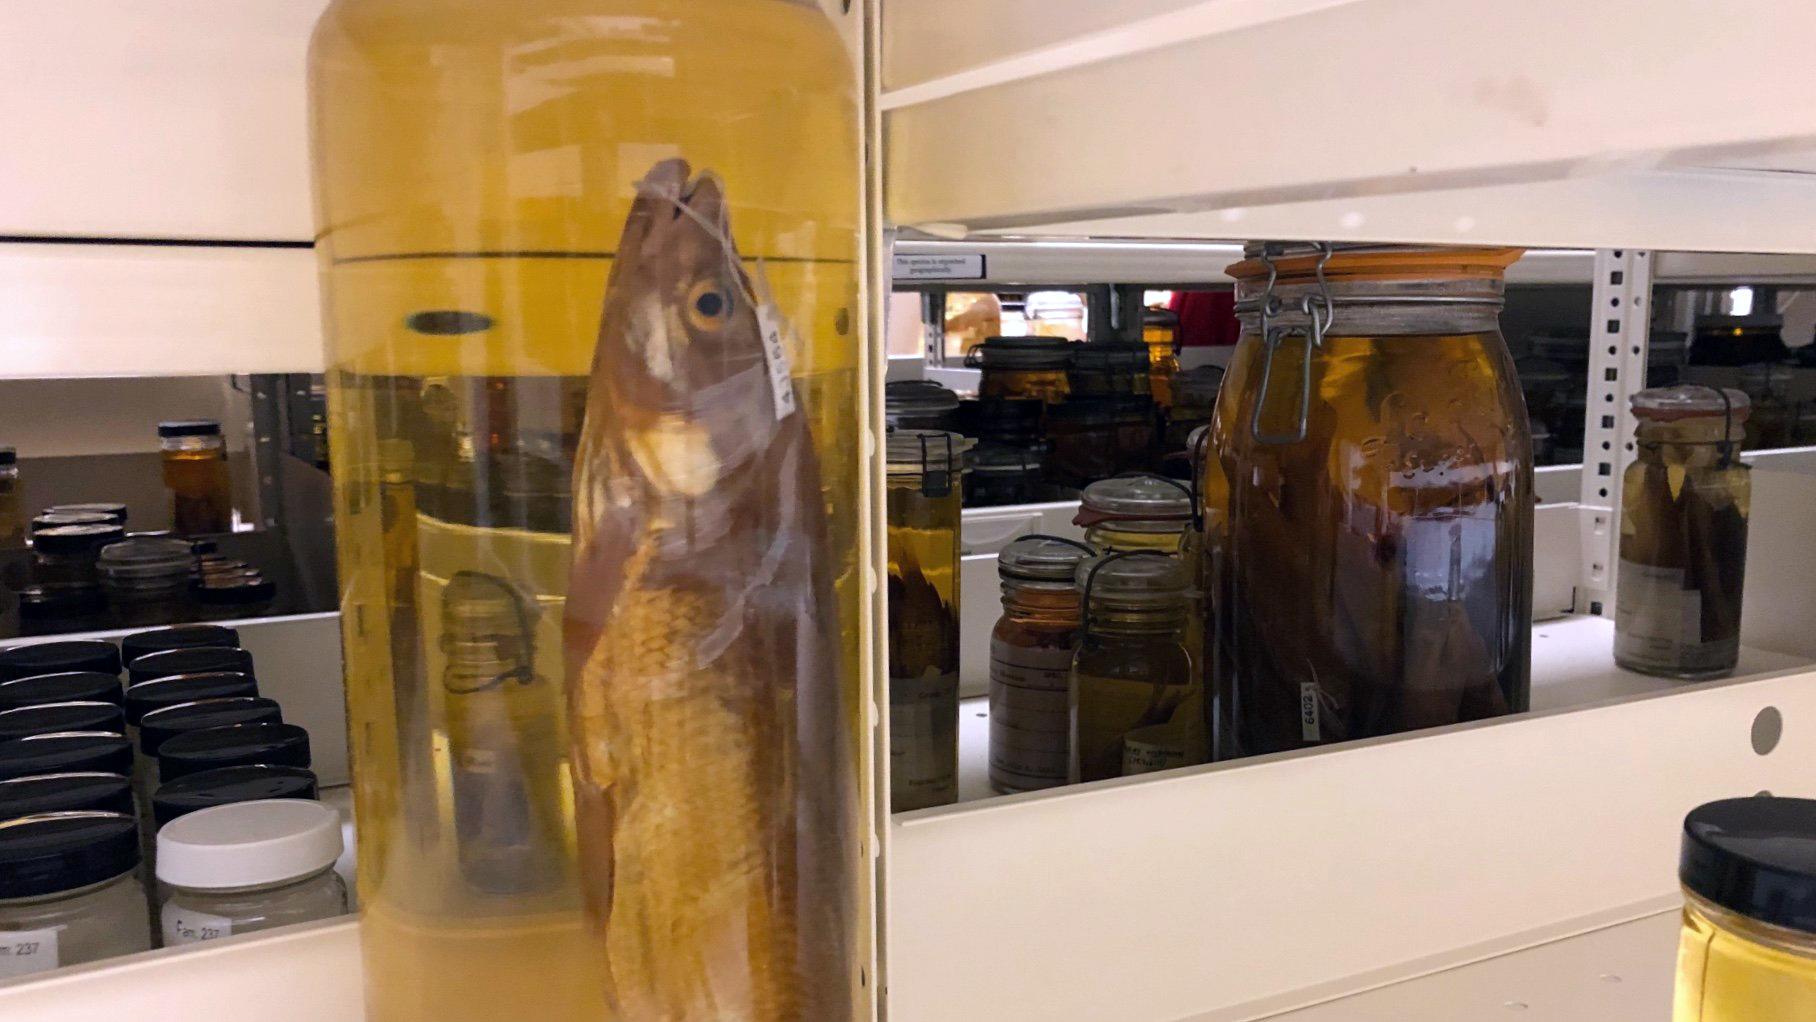 The Field Museum has more than 2 million fish in its research collections. (Patty Wetli / WTTW News)